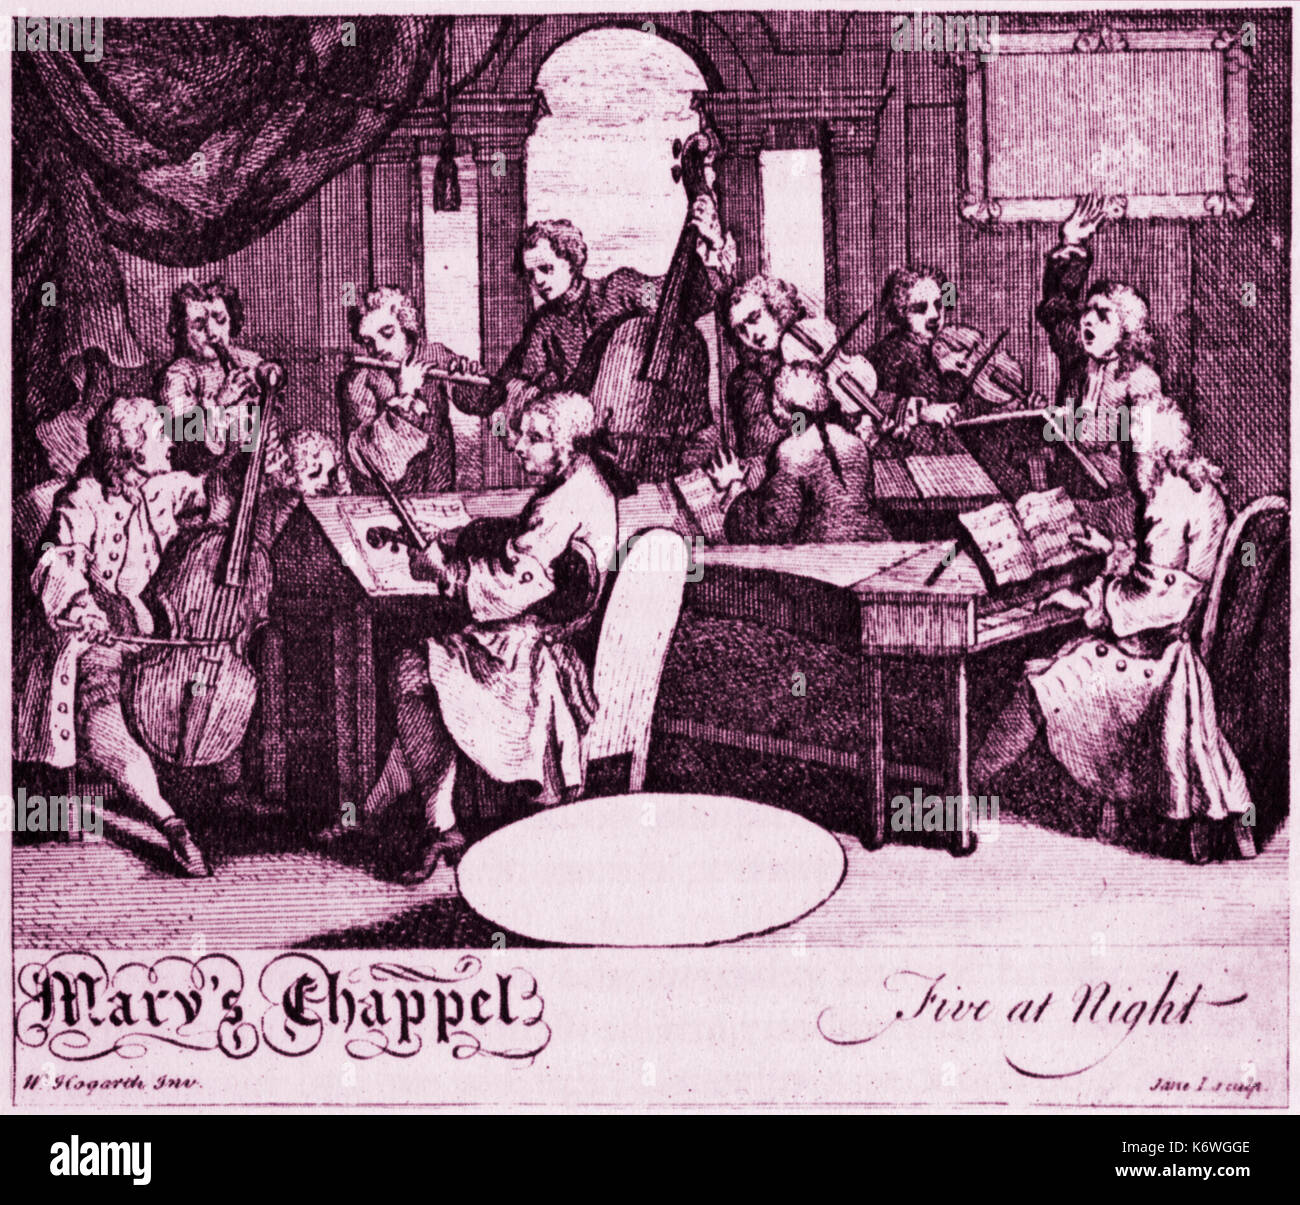 Chamber music ensemble from concert ticket for concert at St Mary's Chapel, 1 May 1799. Hogarth engraving showing baroque orchestra. Harpsichord, viola da gamba, violins, flute, oboe, conductor. Wigs. Stock Photo